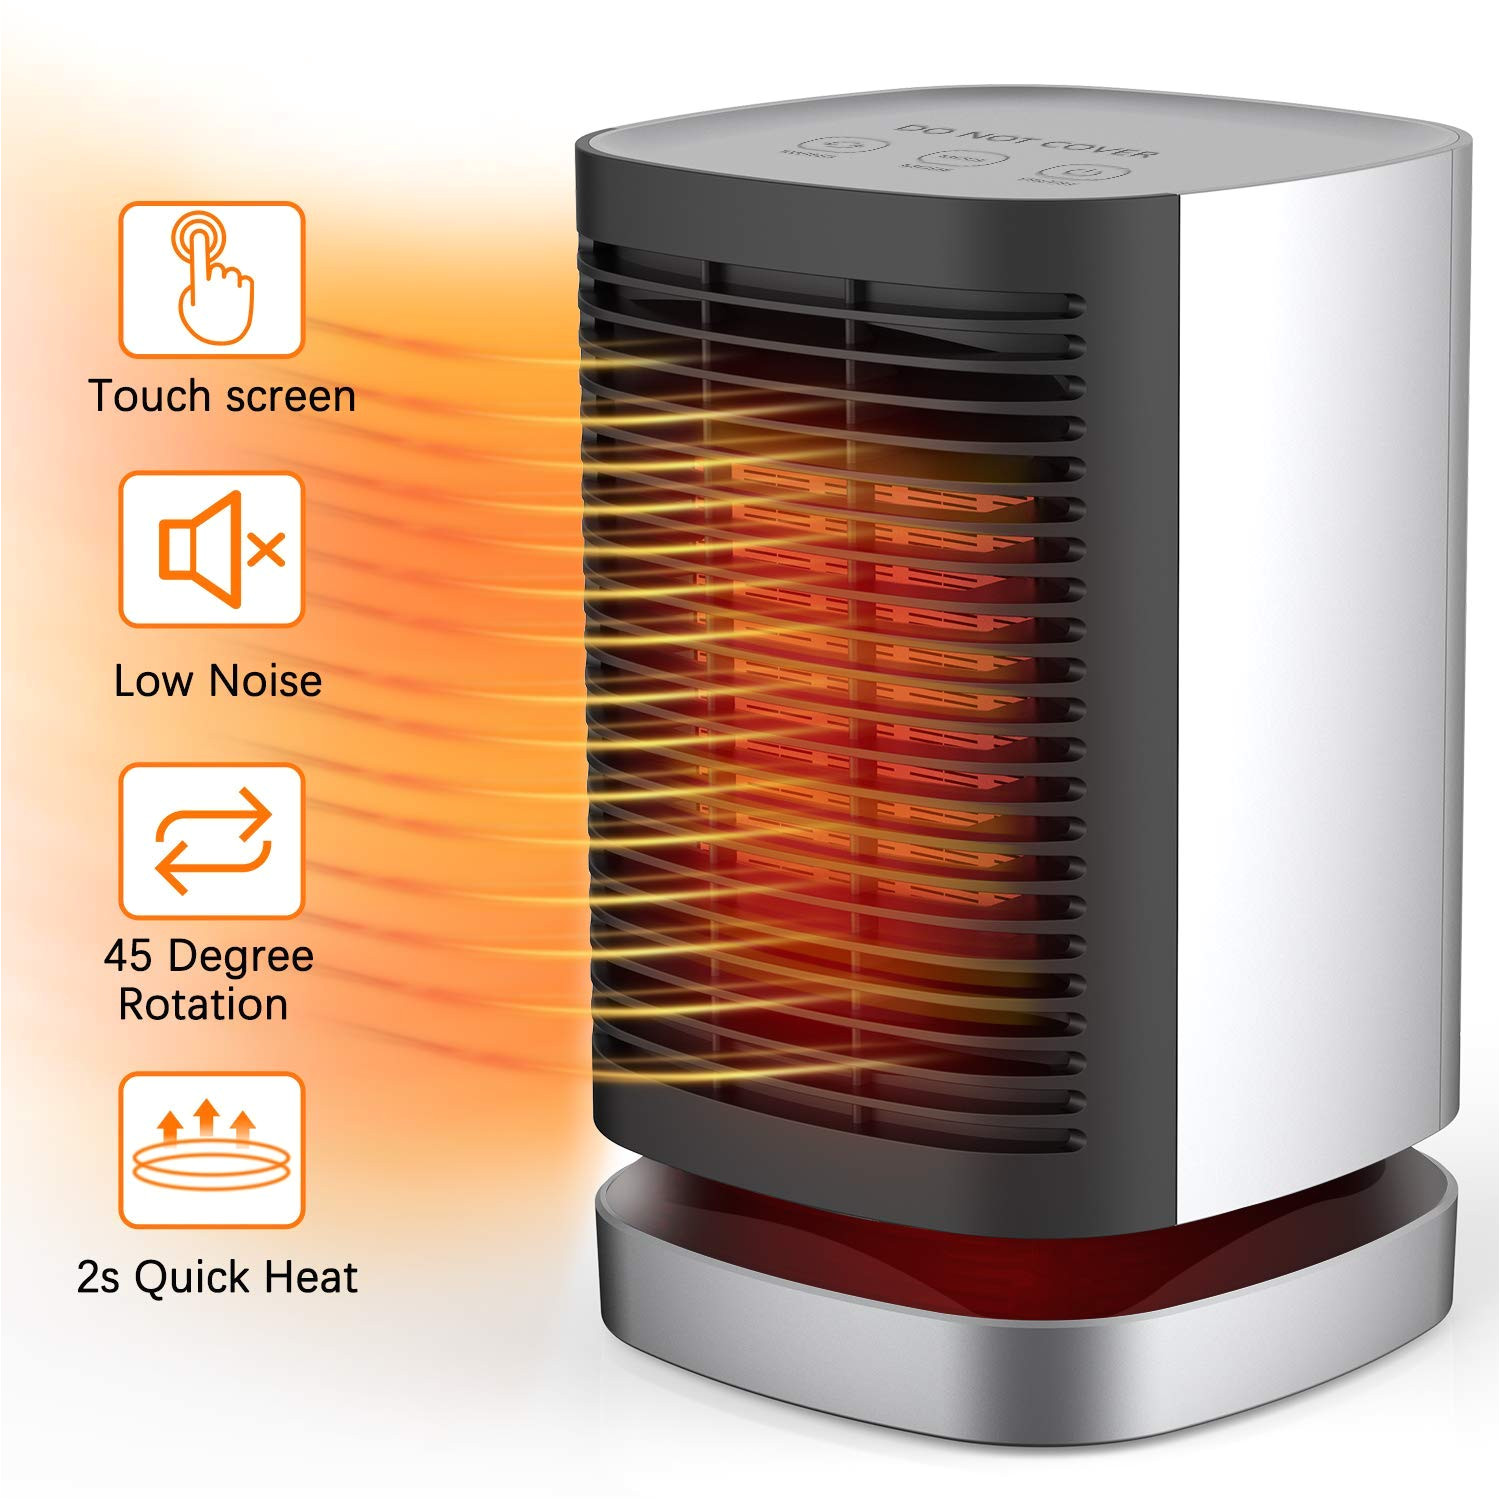 amazon com ailuki portable space heater 950w with oscillating function indoor desk personal heater with tip over and overheating protection ptc electric 2s